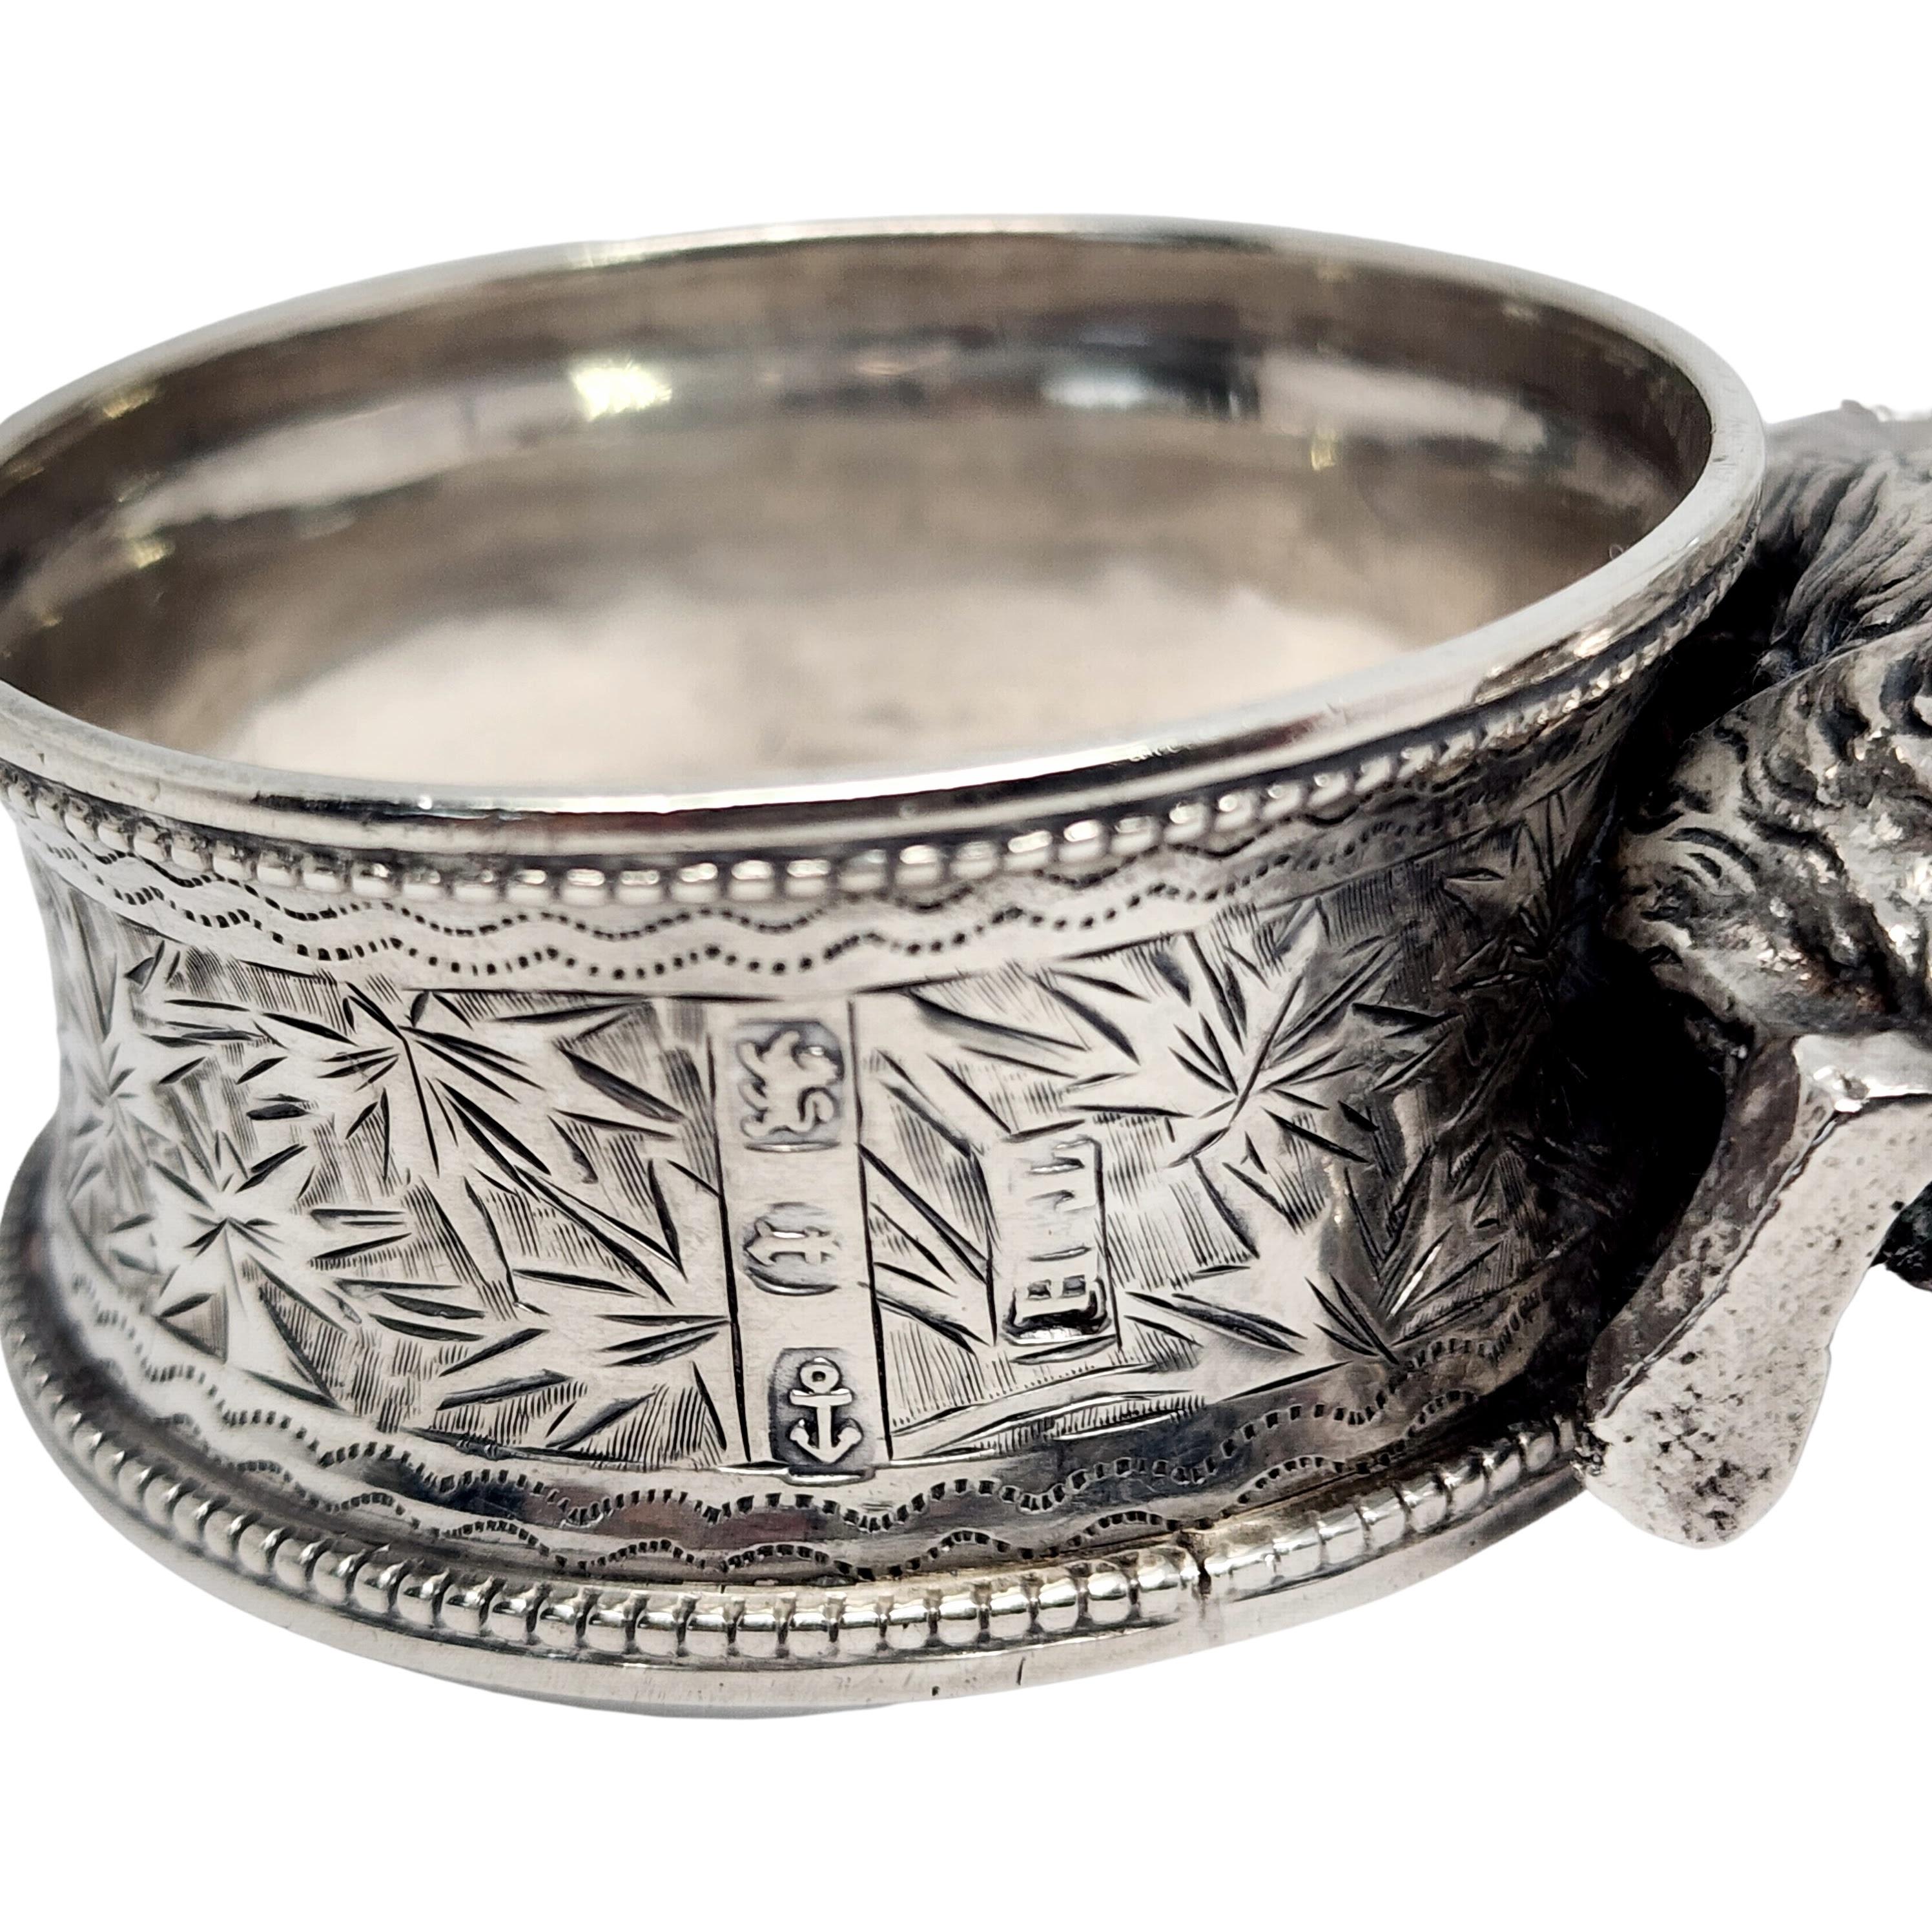 Victorian sterling silver applied rabbit napkin ring by Thomas Hayes of Birmingham England with monogram. Circa 1893.

Monogram appears to be VMH

Etched design around the ring with a monogram at the top in a cartouche, beaded edging. Large figural